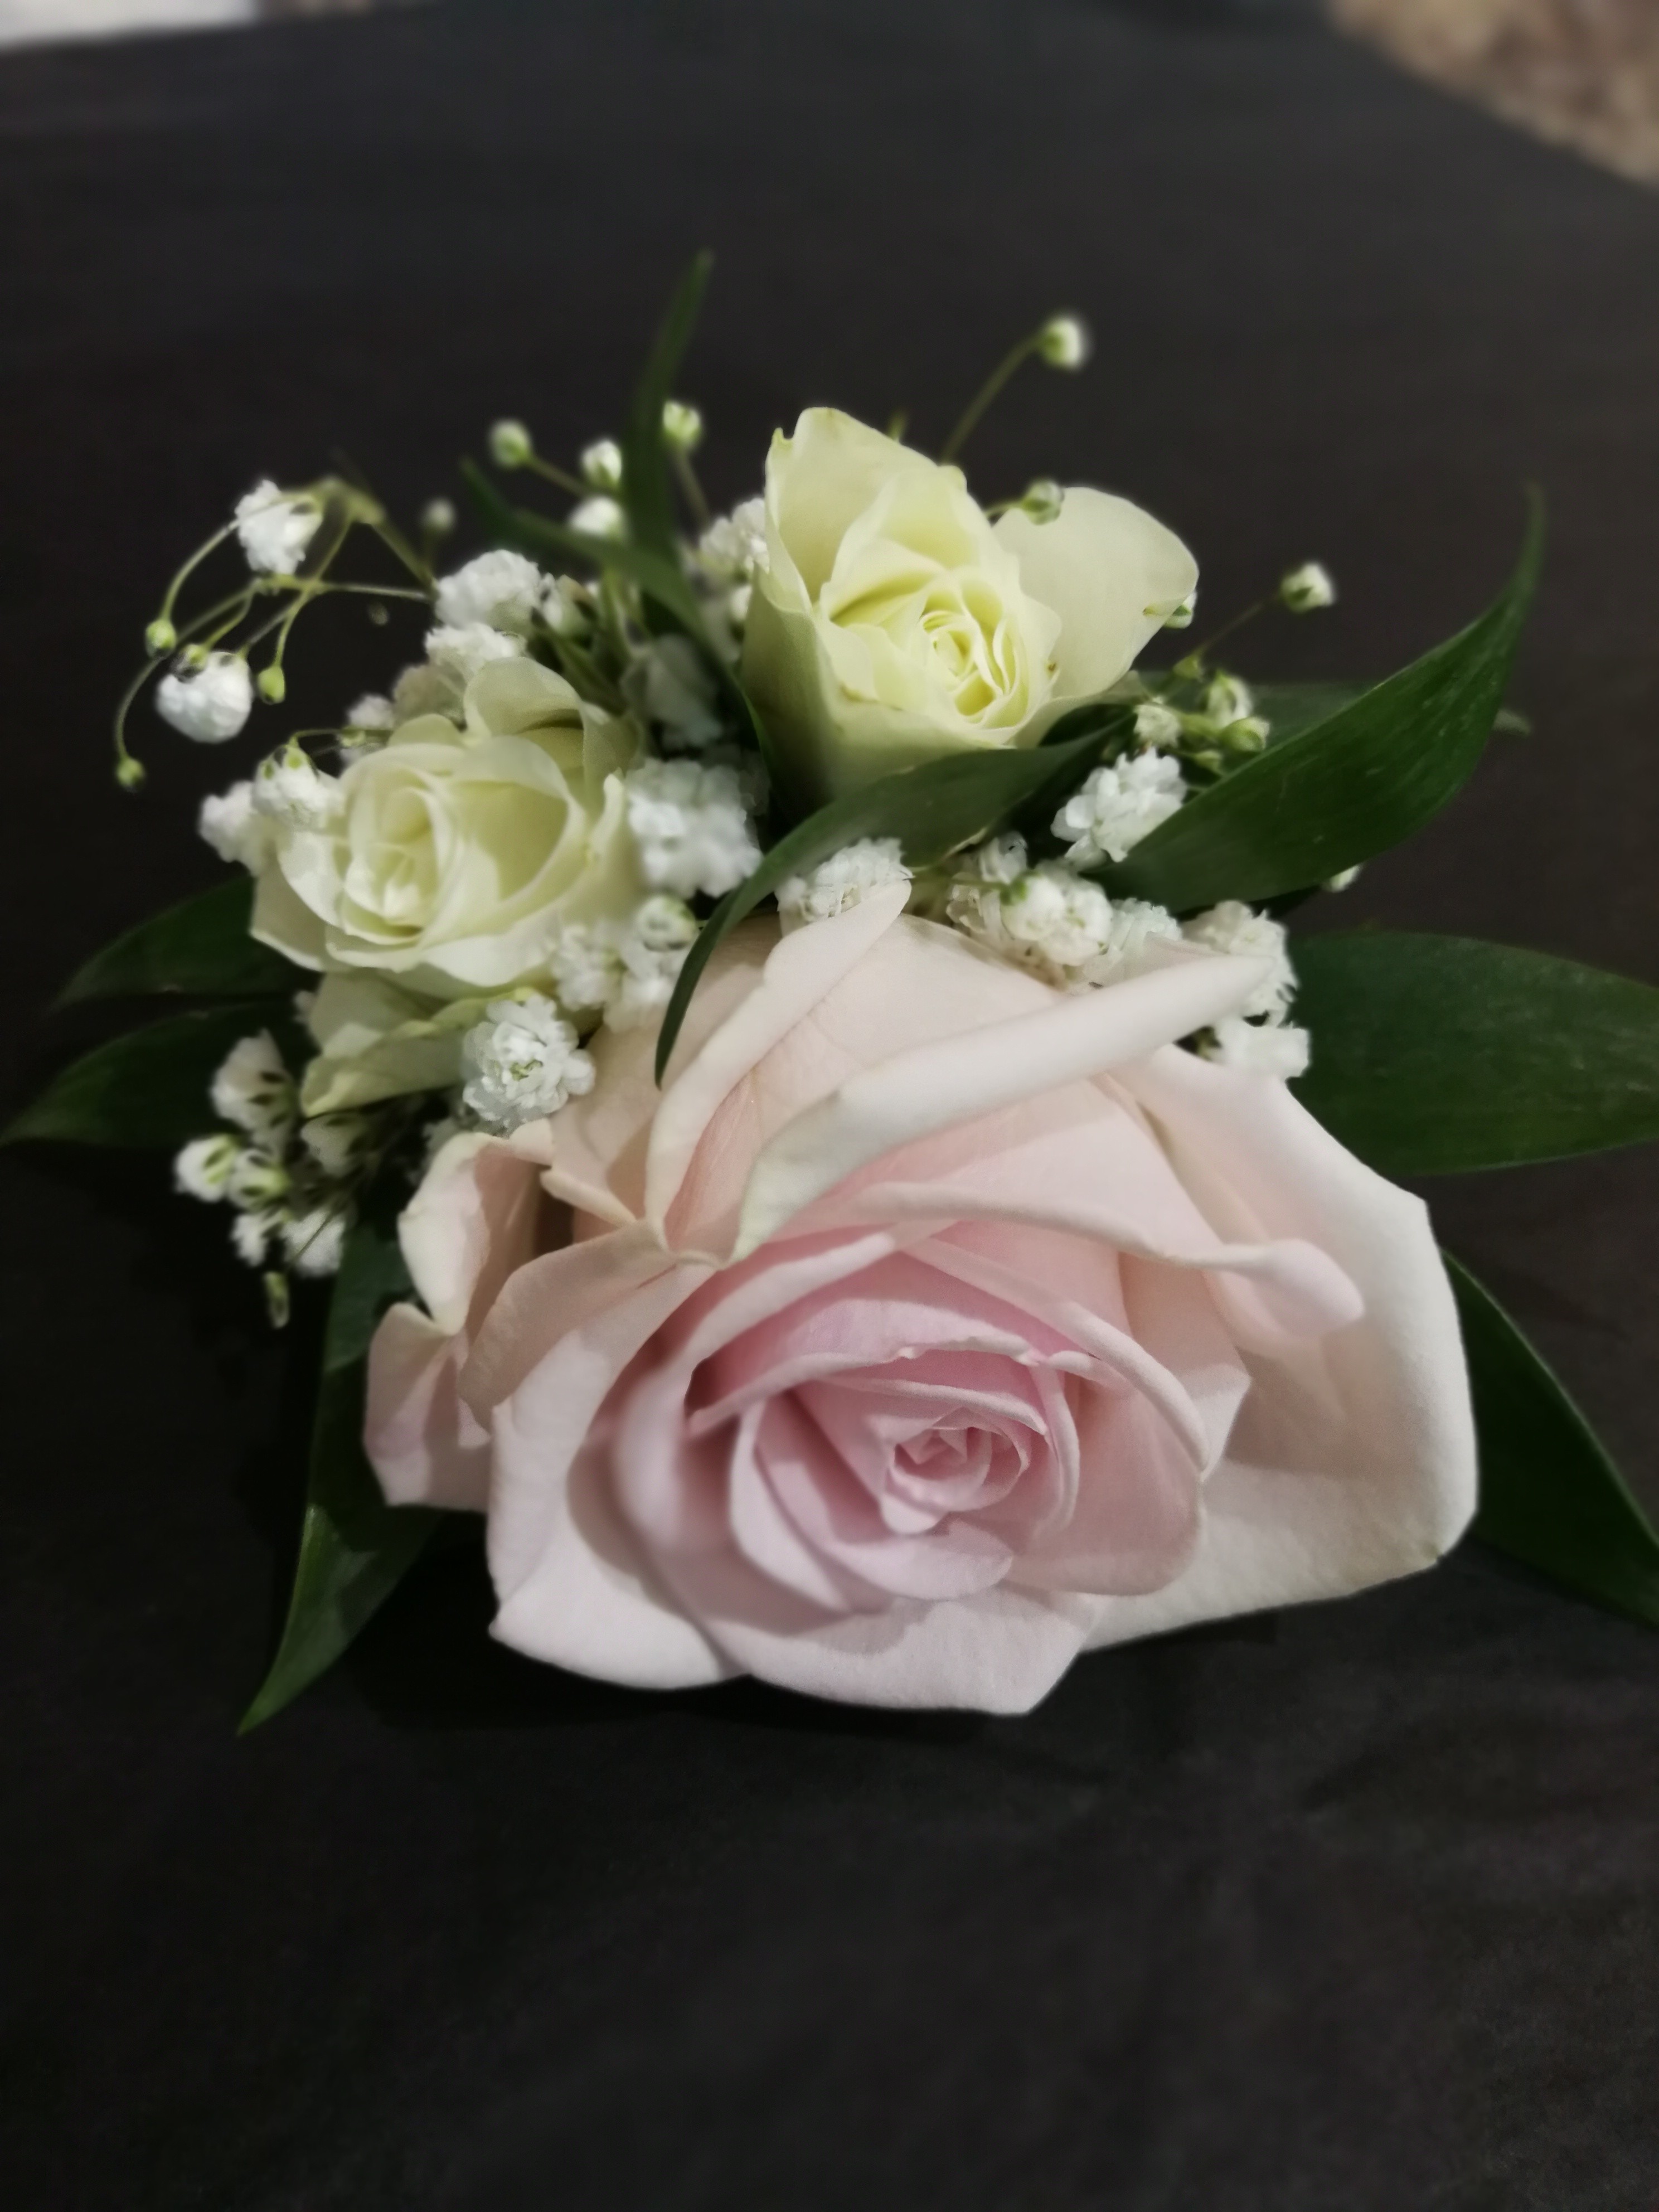 Boutonnière - Single Pink Rose w/ White Accents